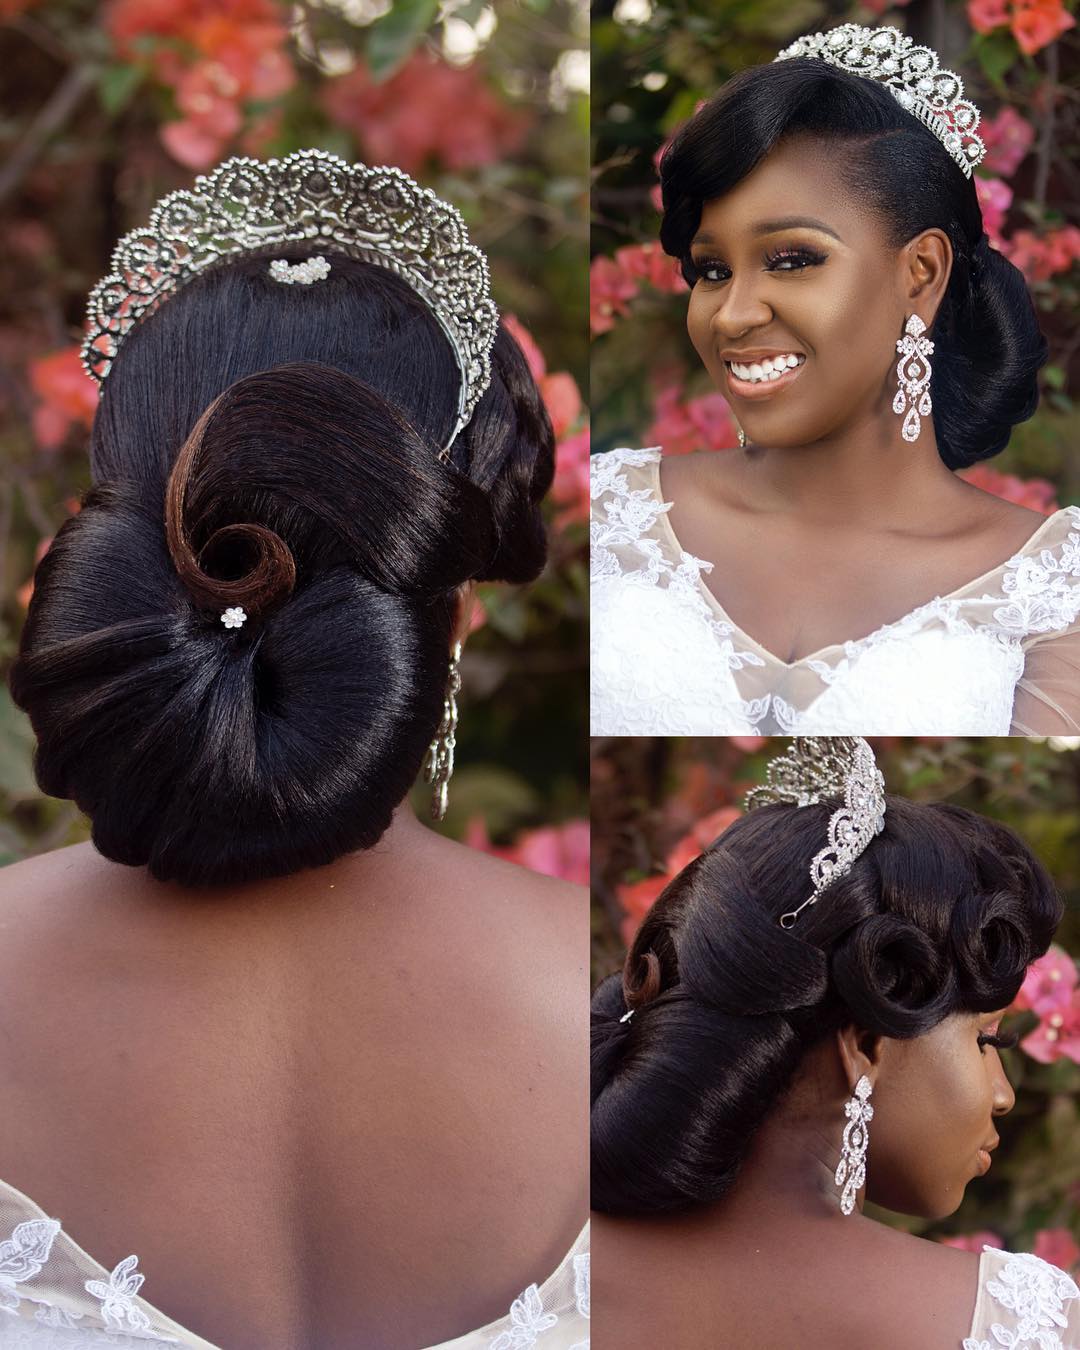 Lovely Bridal Hairstyles That Will Have You Drooling!